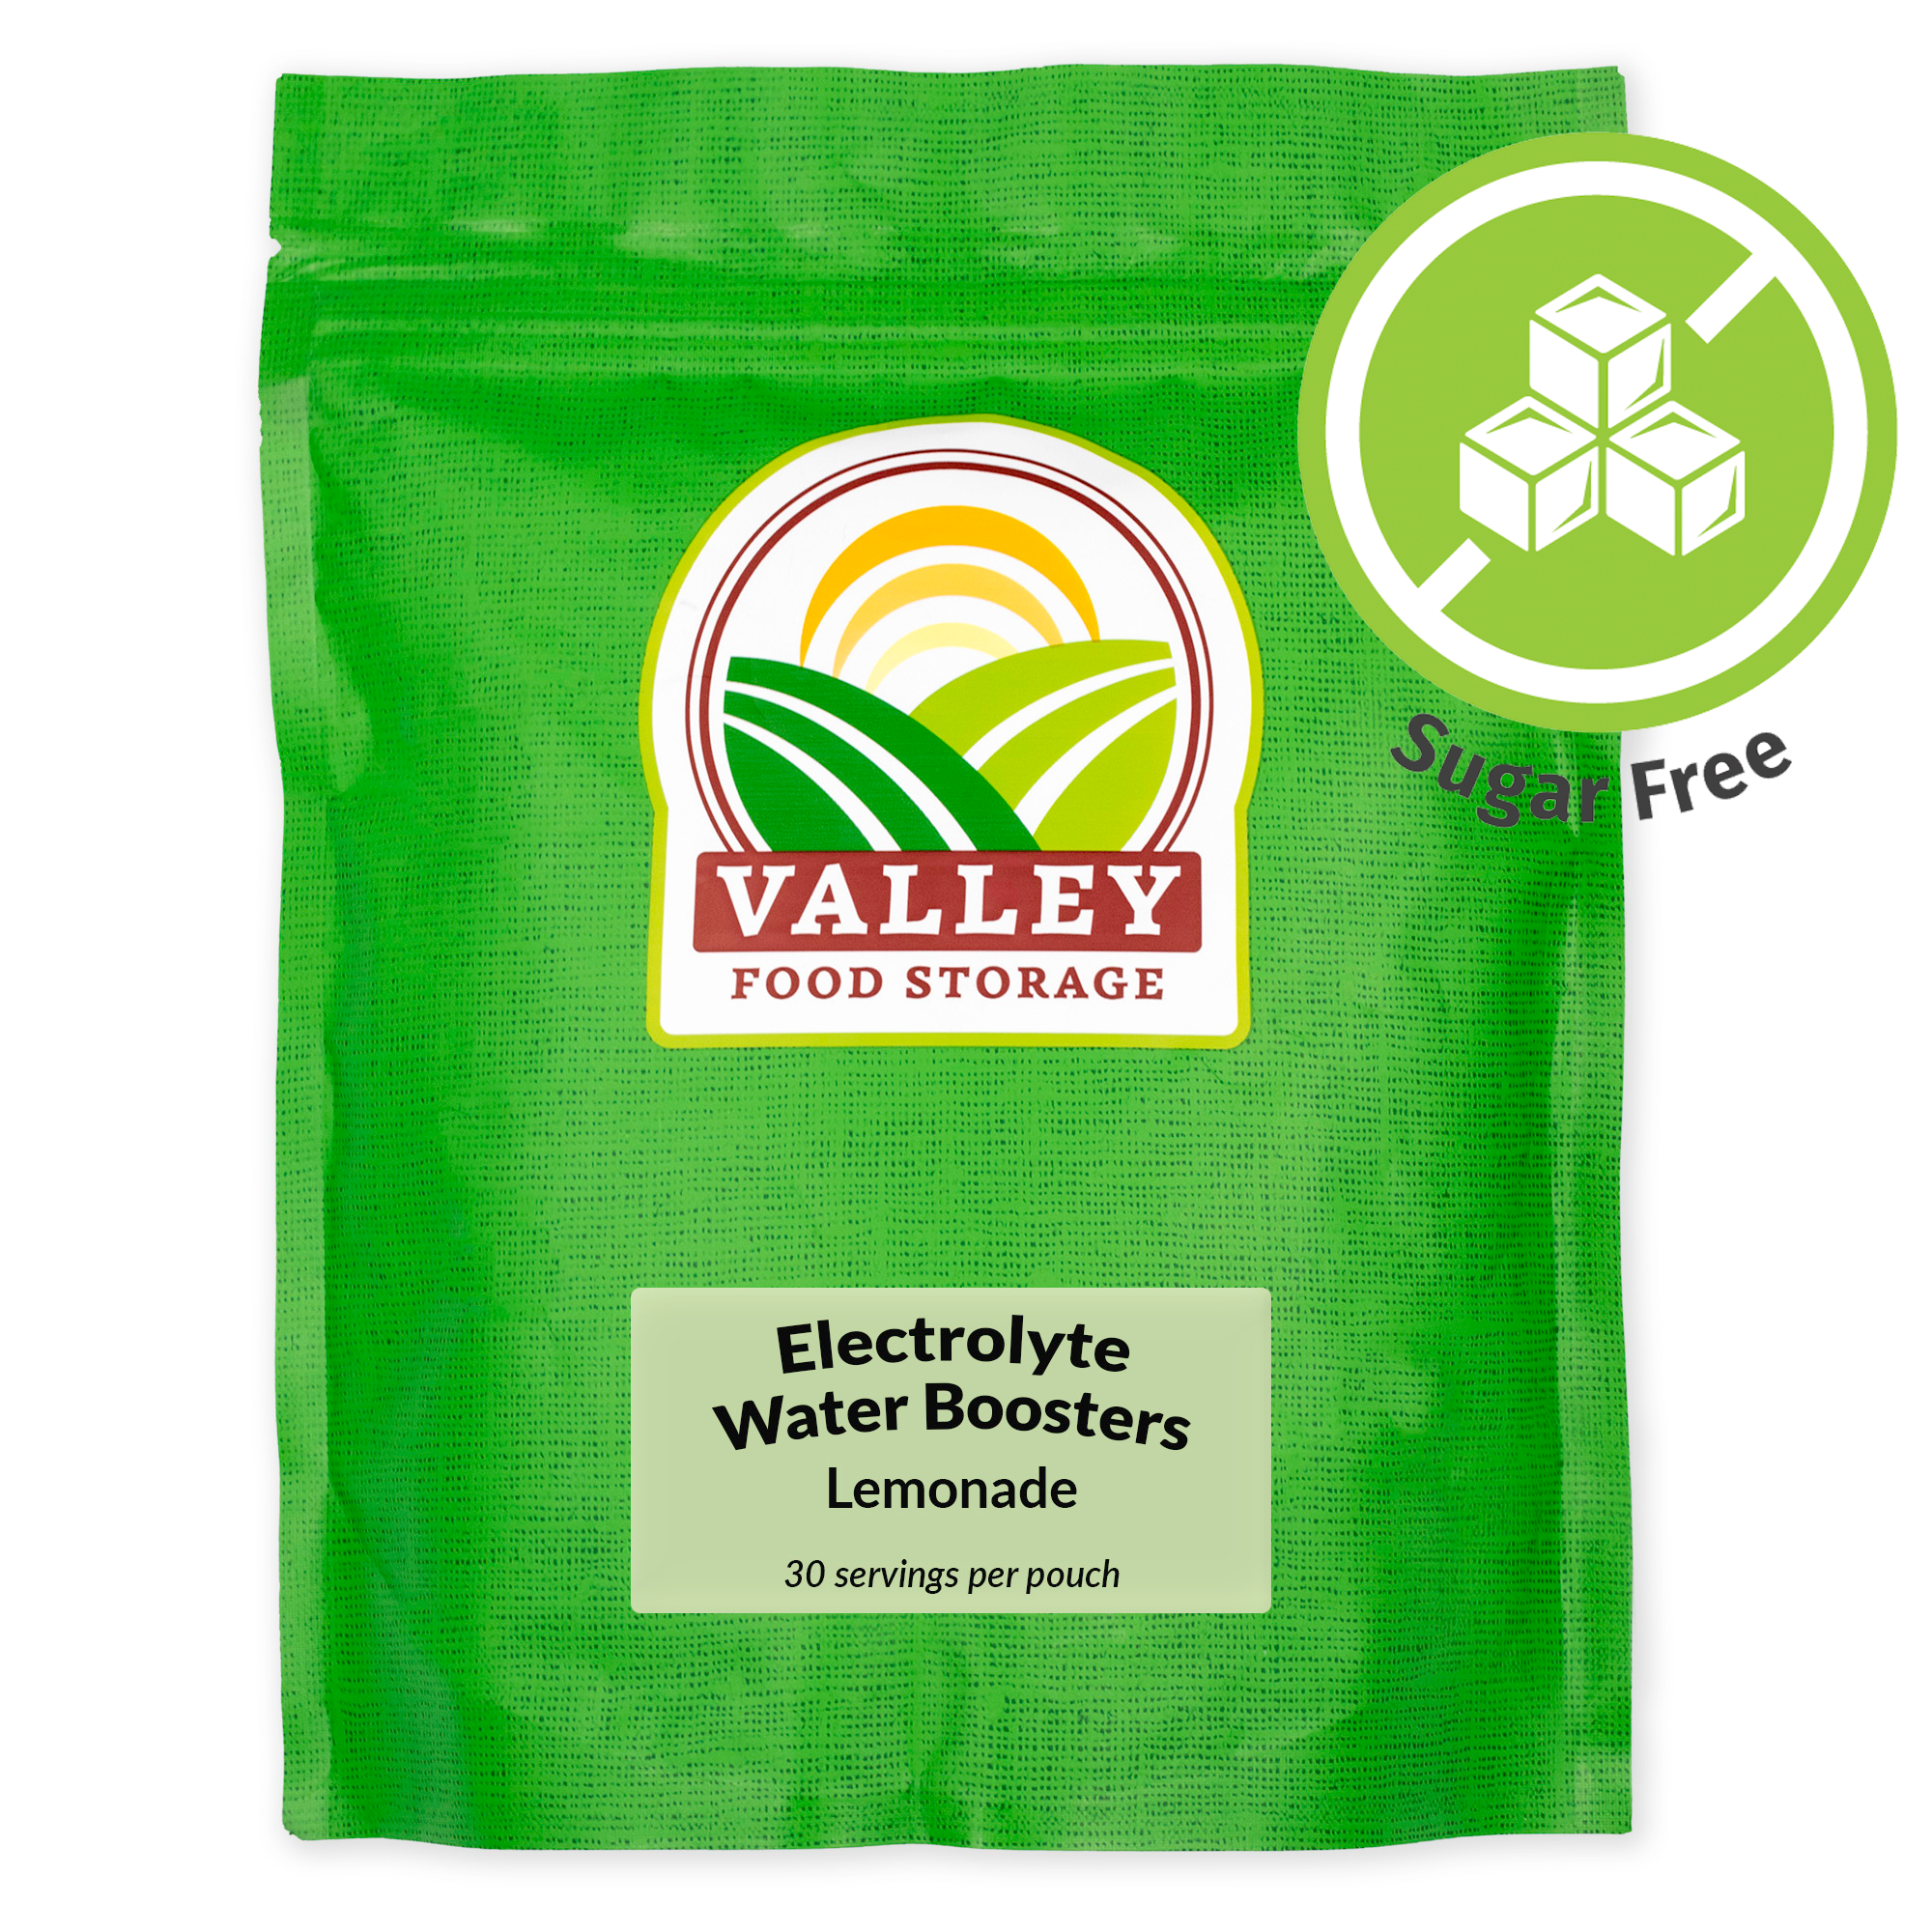 Hydrating Electrolyte Drink Powder Electrolyte Drink Powder | Buy Hydrating Powdered Electrolytes For Your Drinking Water From Valley Food Storage